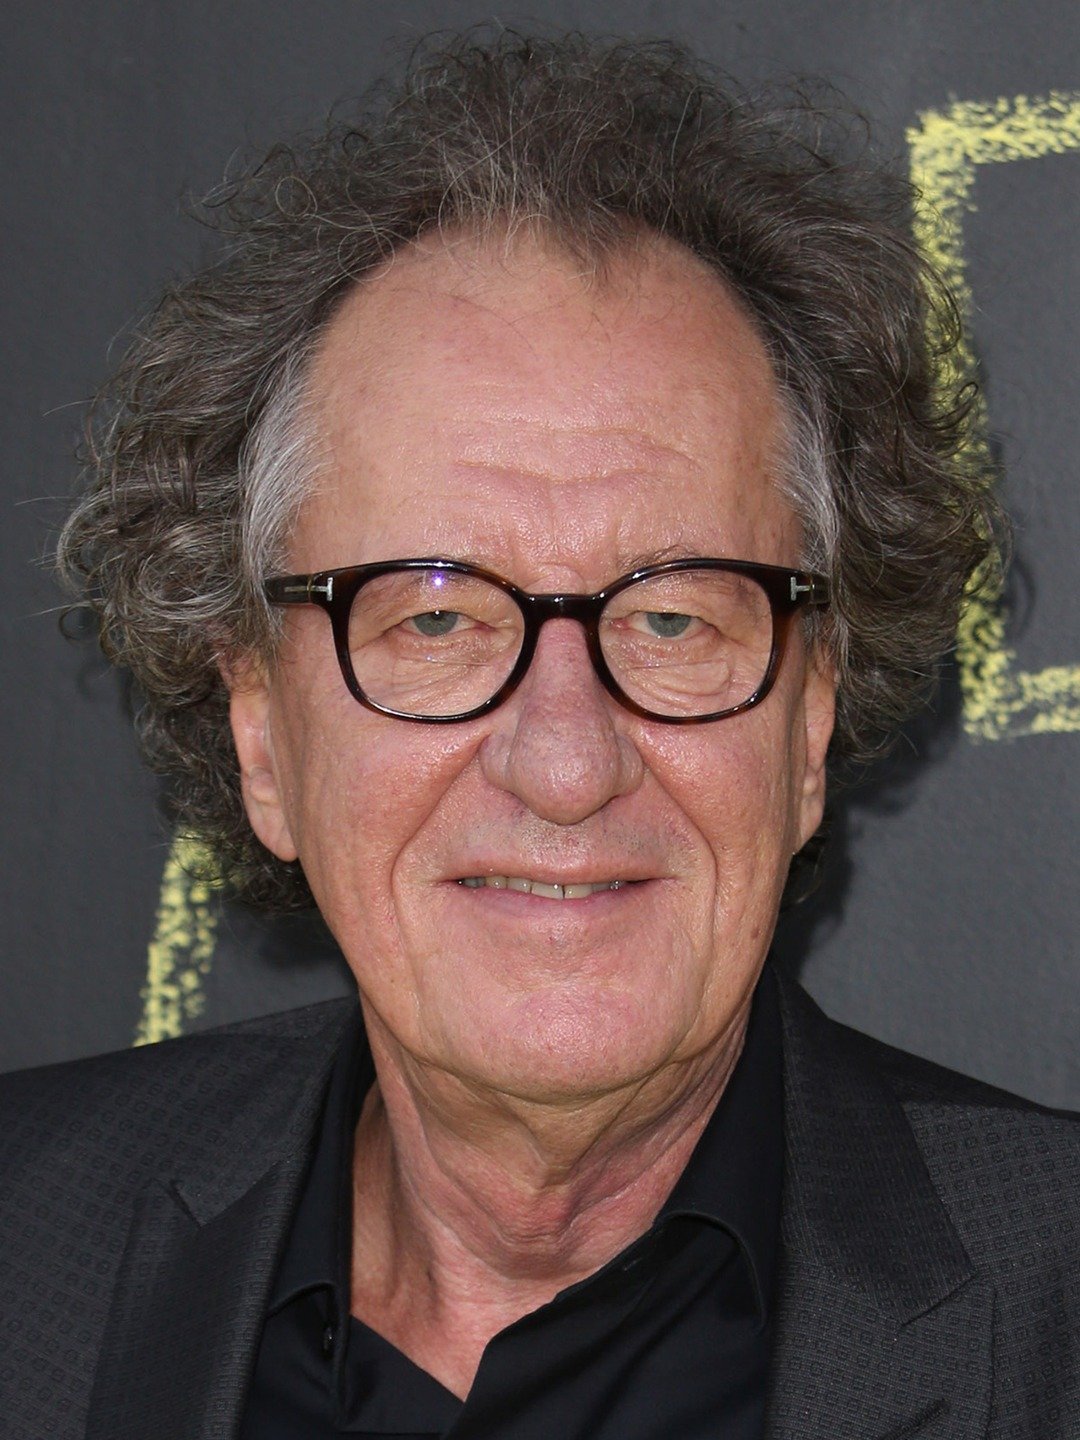 How tall is Geoffrey Rush?